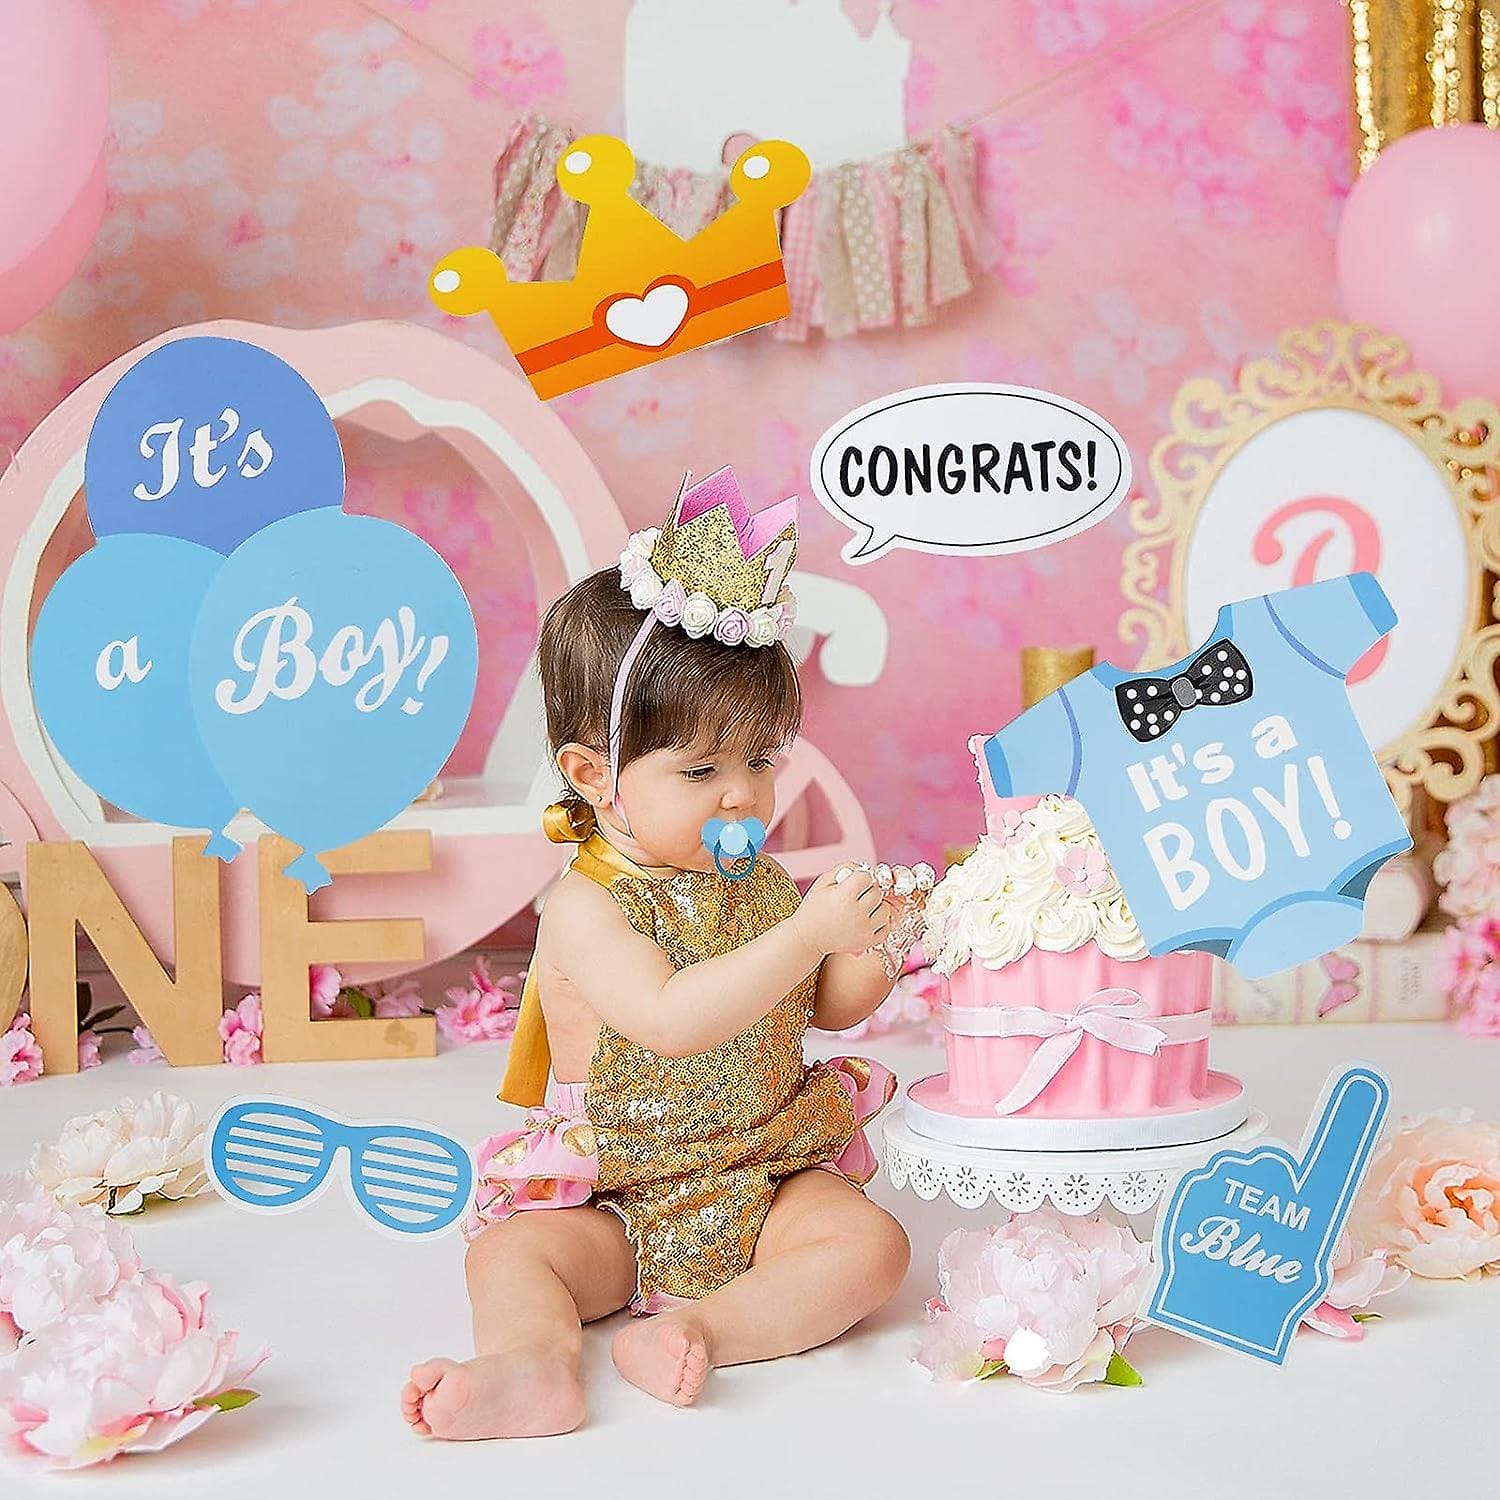 25 Pcs Baby Shower Props, It's A Girl/ Boy Decorations Party Baby Shower Photo Booth, Mommy to Be Sash Baby Shower Party